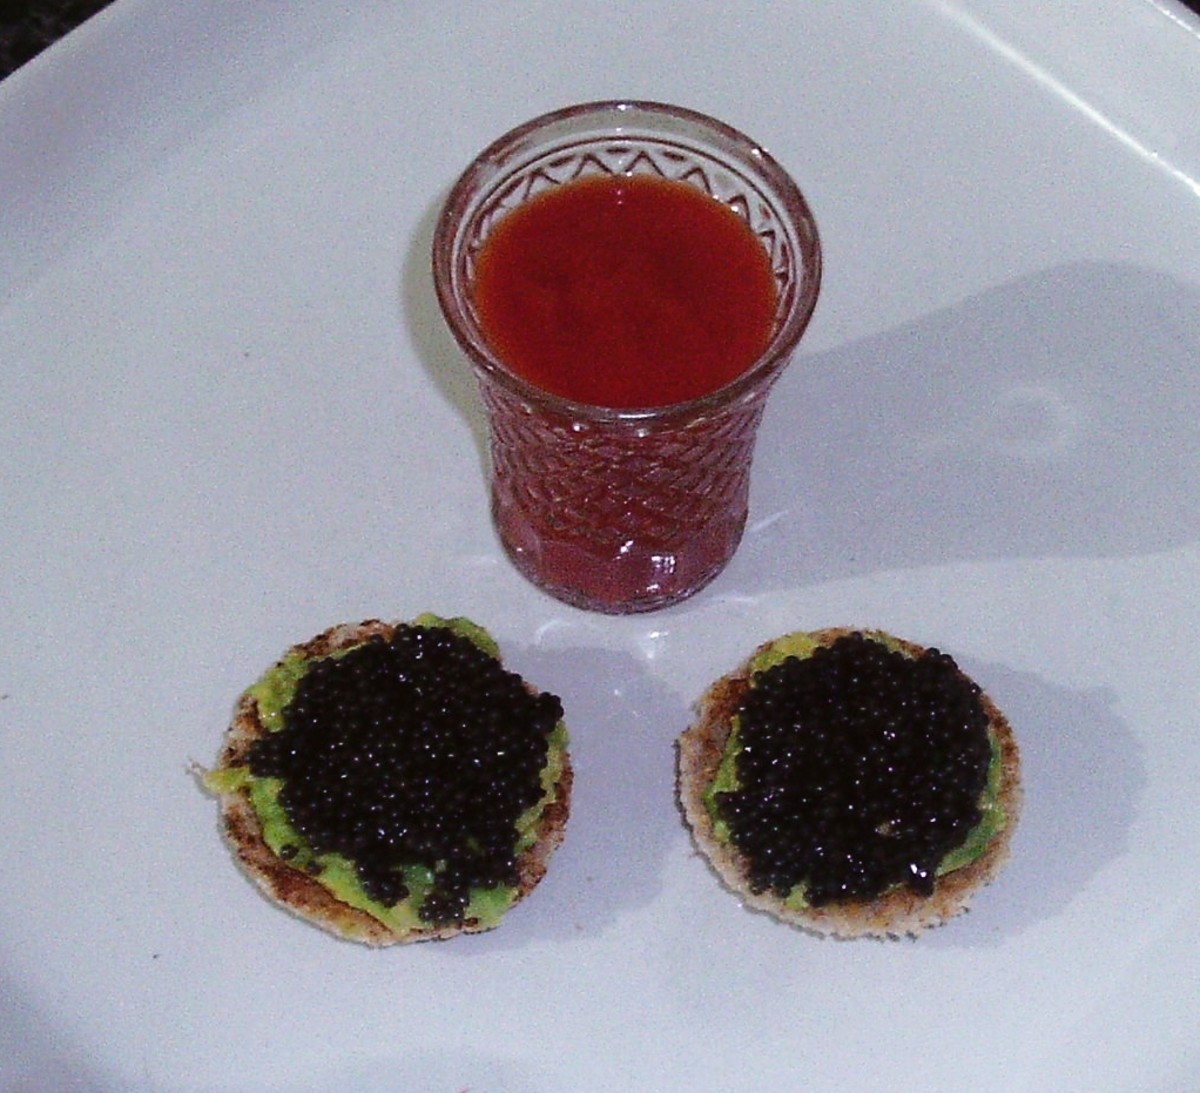 Caviar and spiced avocado on toast is served with a Bloody Mary shot